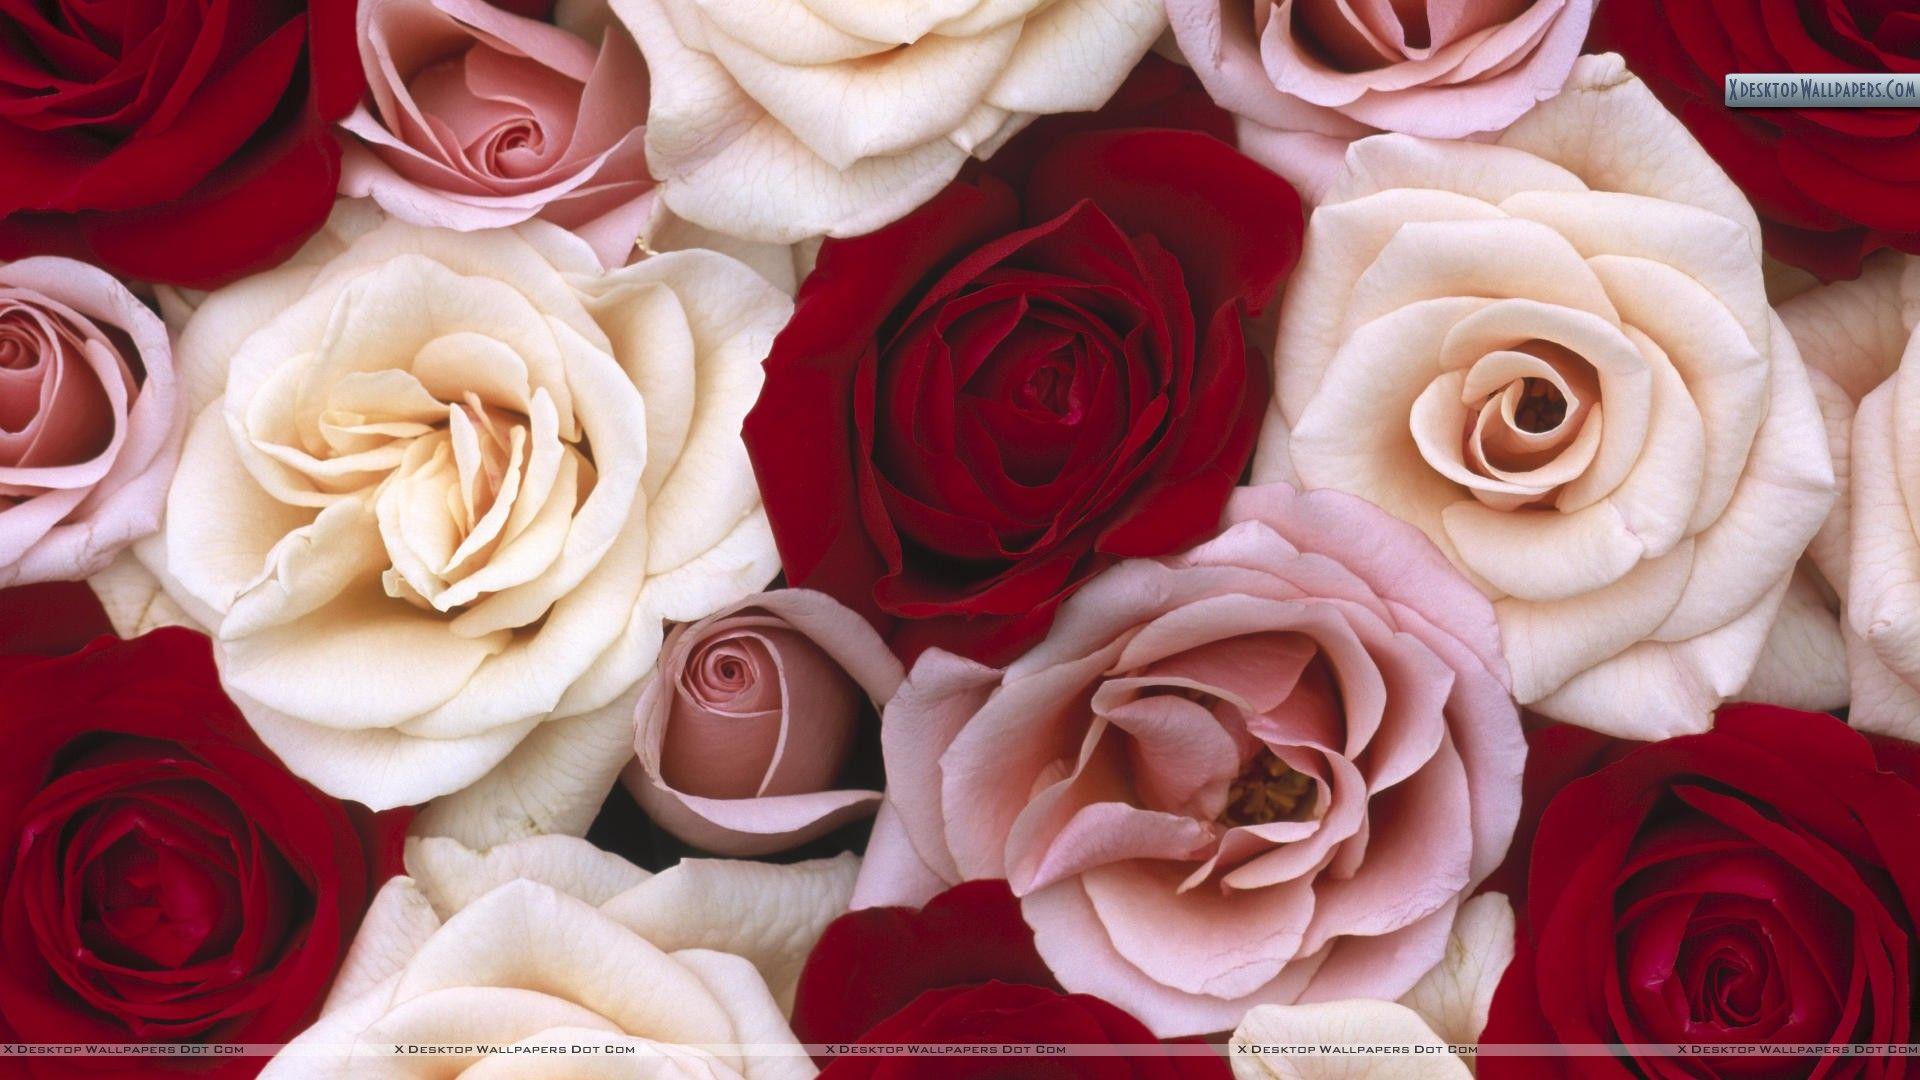 Red Rose Wallpaper, Photo & Image in HD